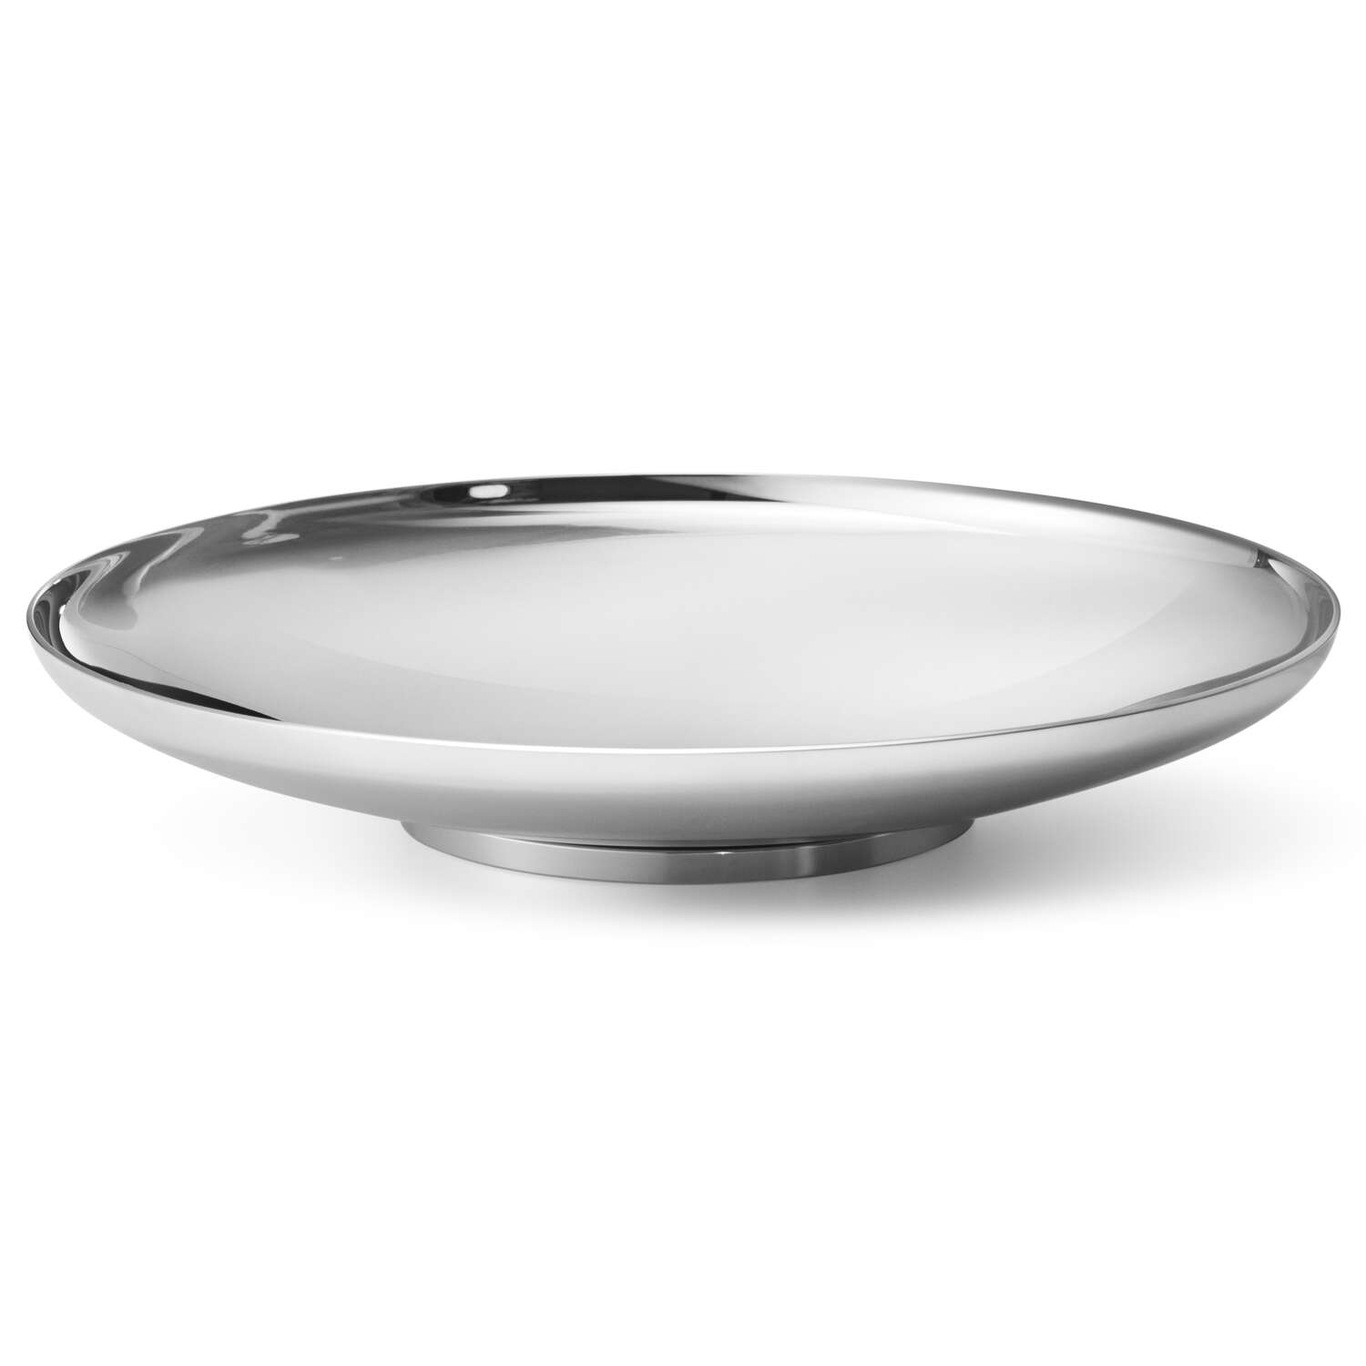 Tunes Bowl, Stainless Steel 192 mm